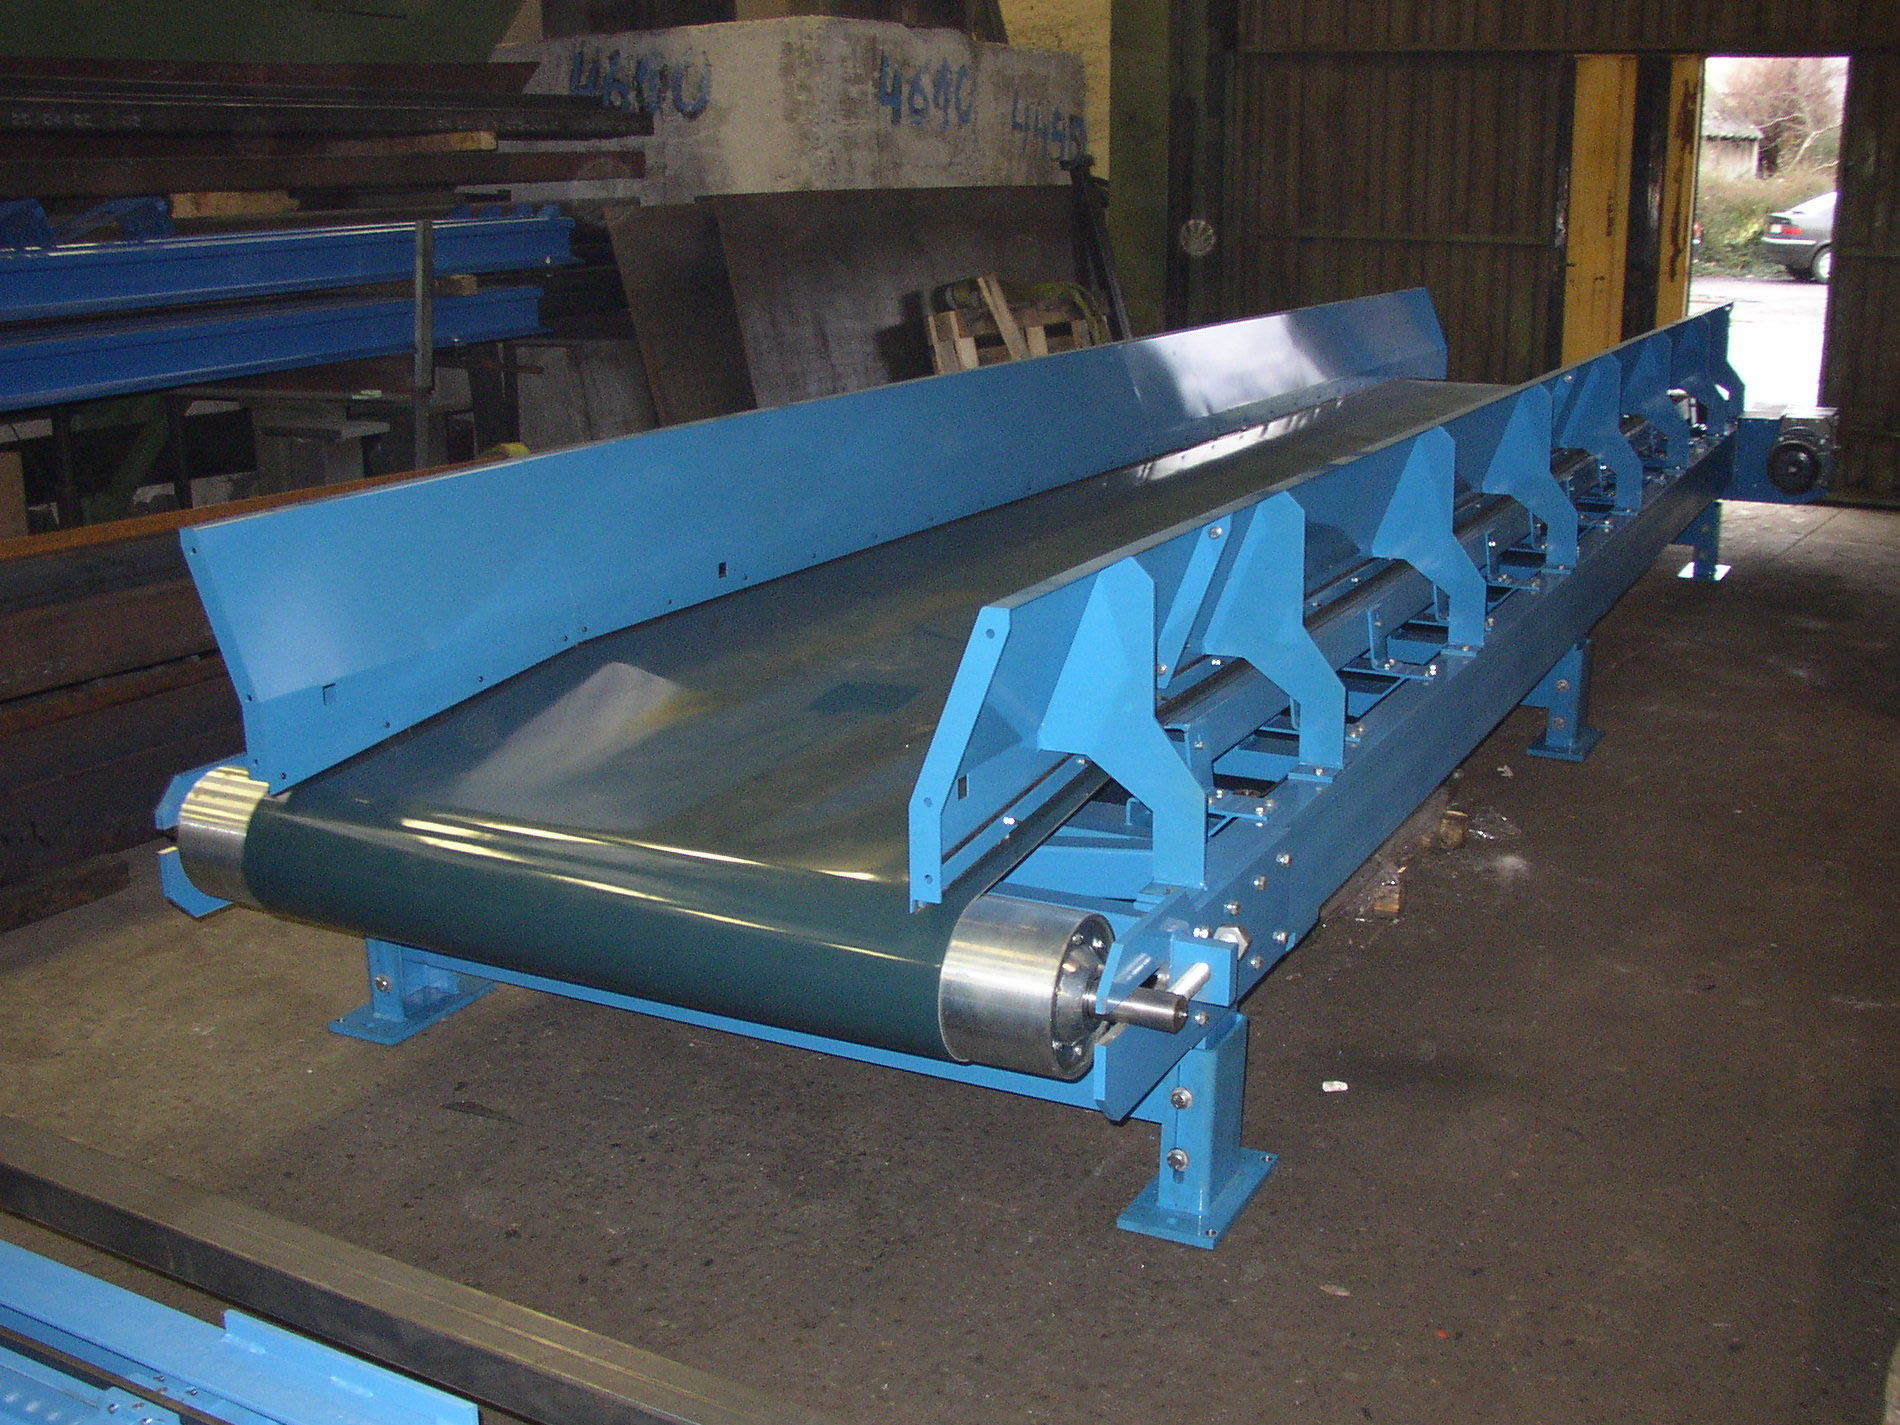 Bespoke manufacturing of straight or curved conveyors, with smooth or ribbed belts